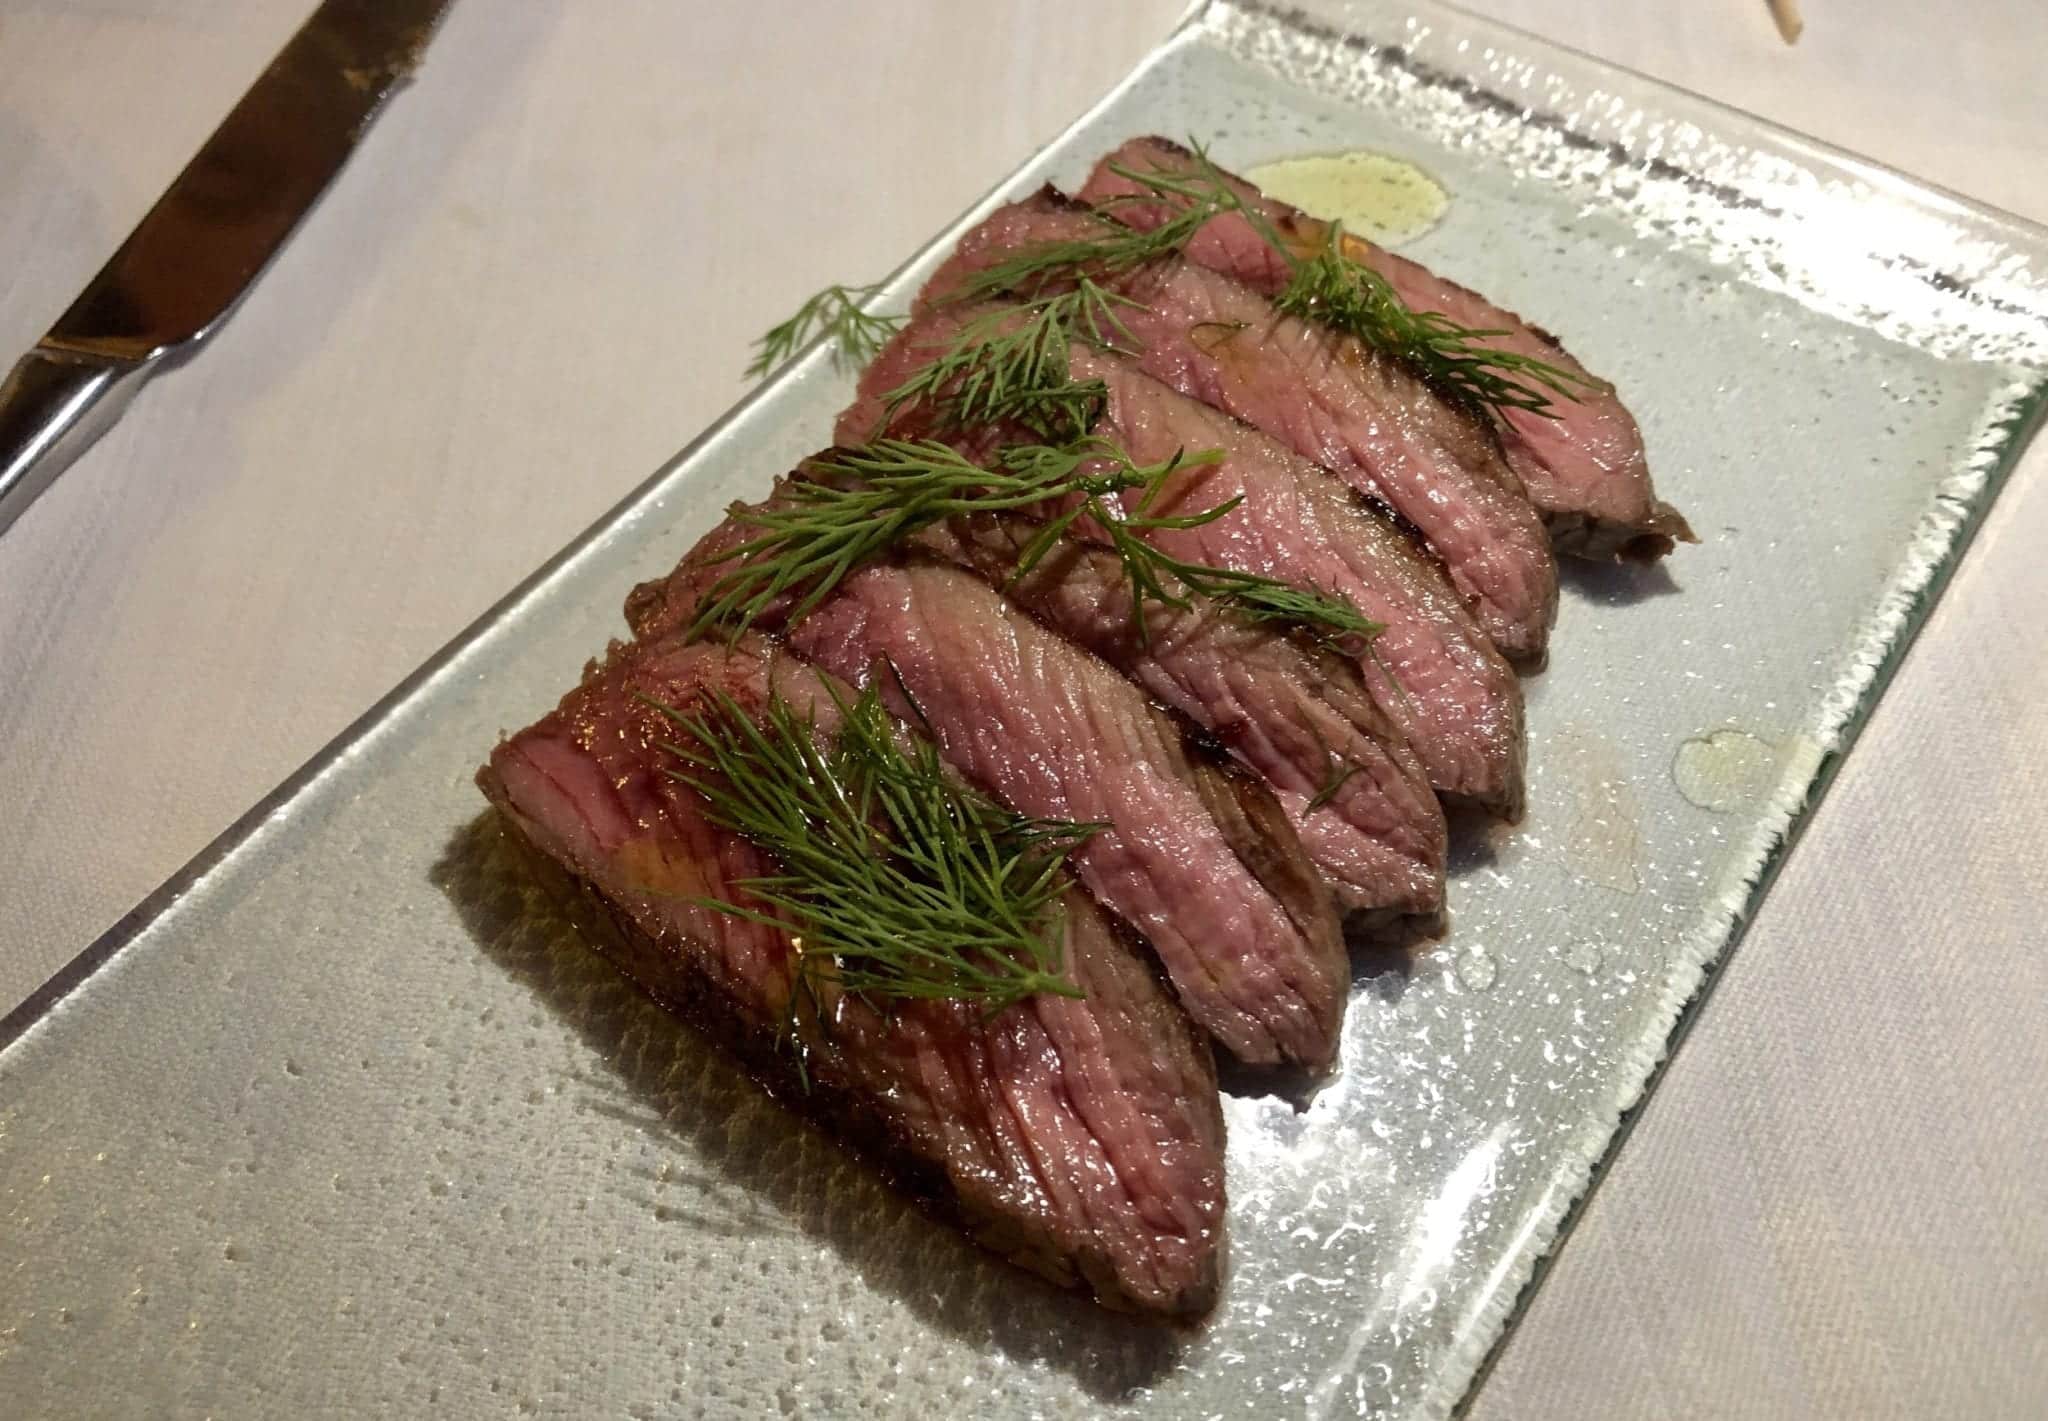 Tagliata di Manzo -- thin slices of filet mignon, topped with dill and served medium rare, sitting on a clear glass plate and a white tablecloth.